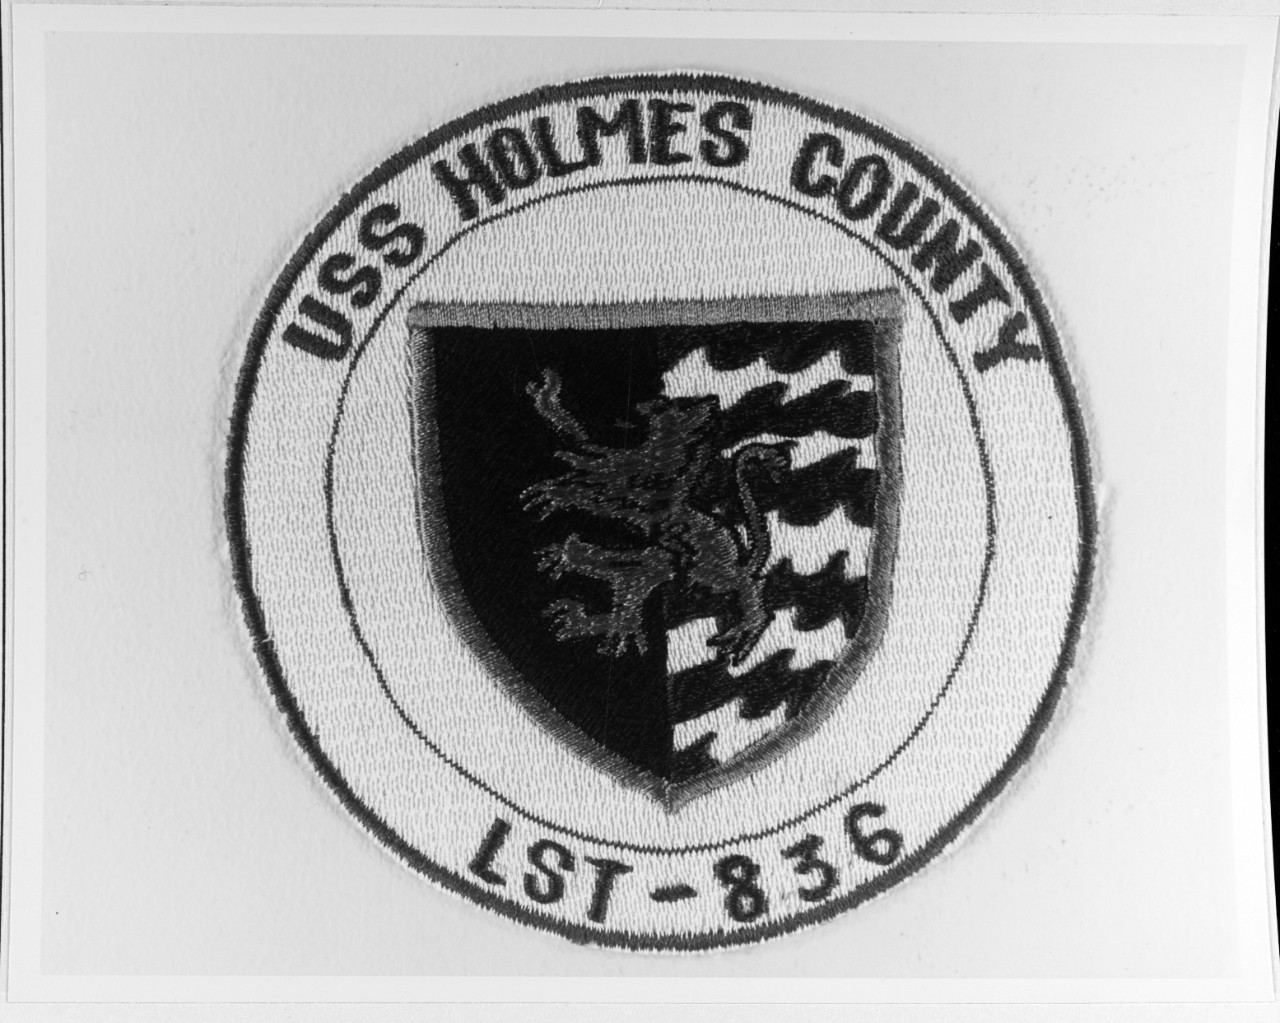 Insignia:  USS HOLMES COUNTY (LST-836)